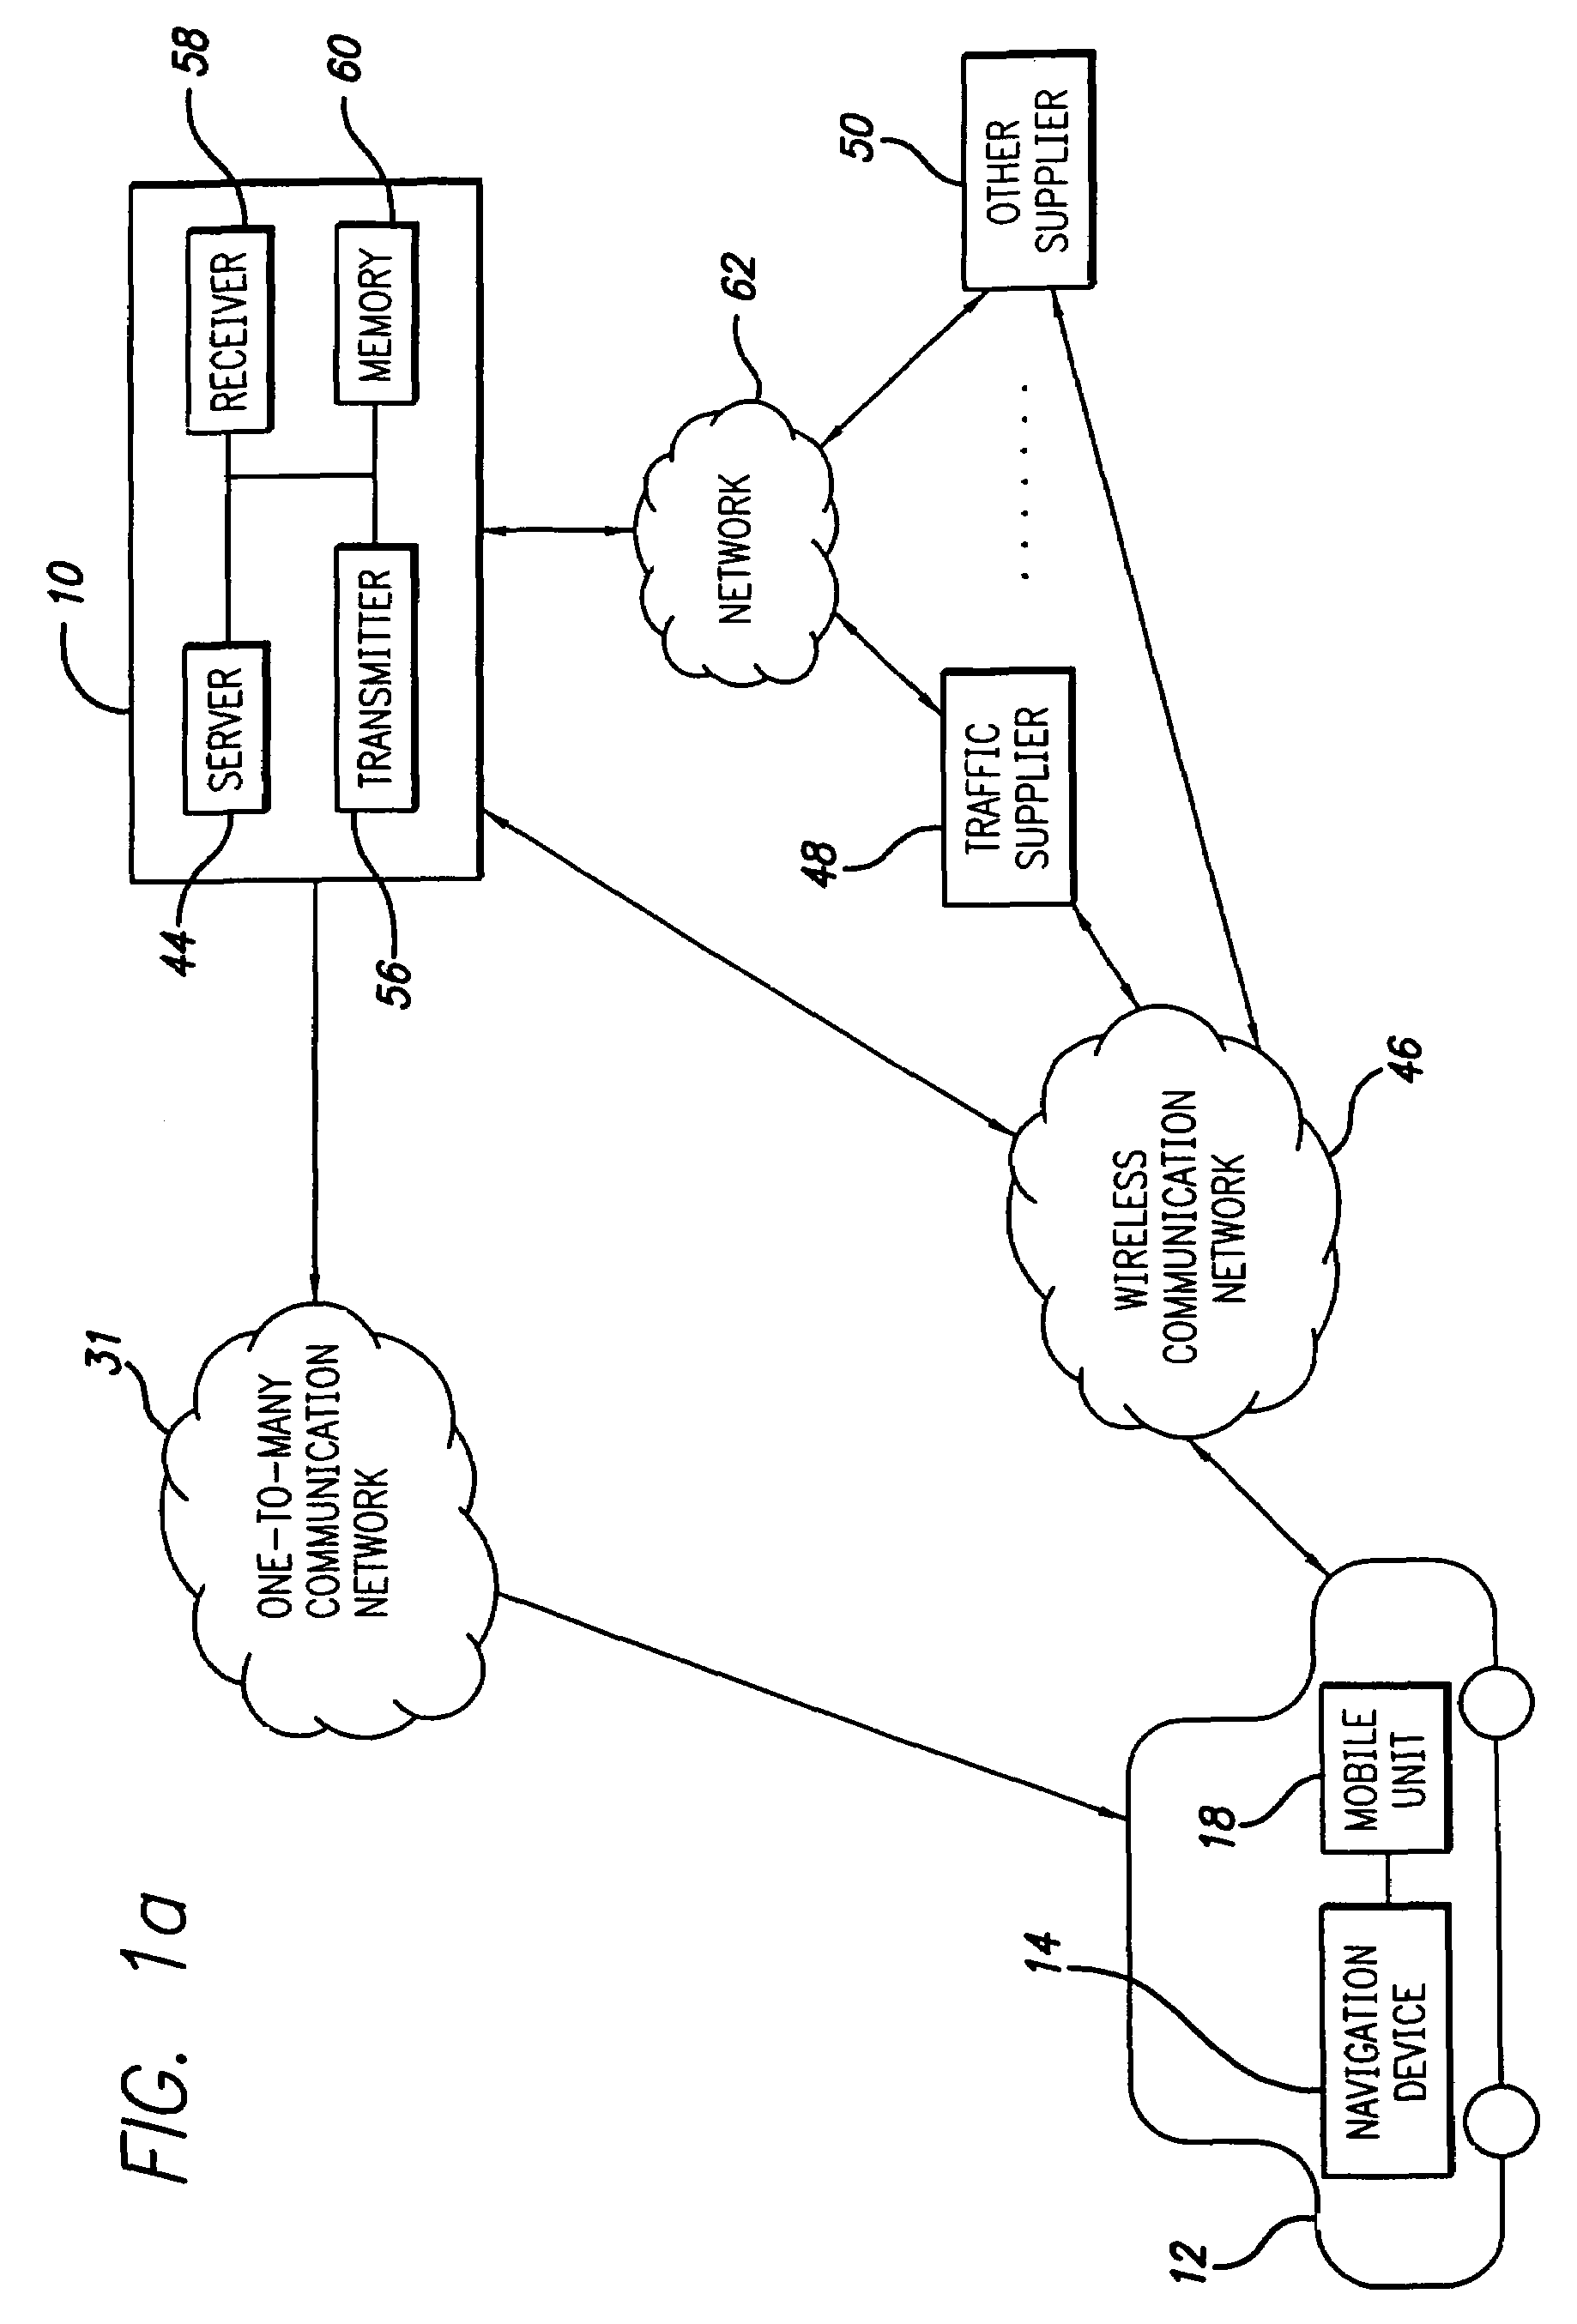 Methods for filtering and providing traffic information